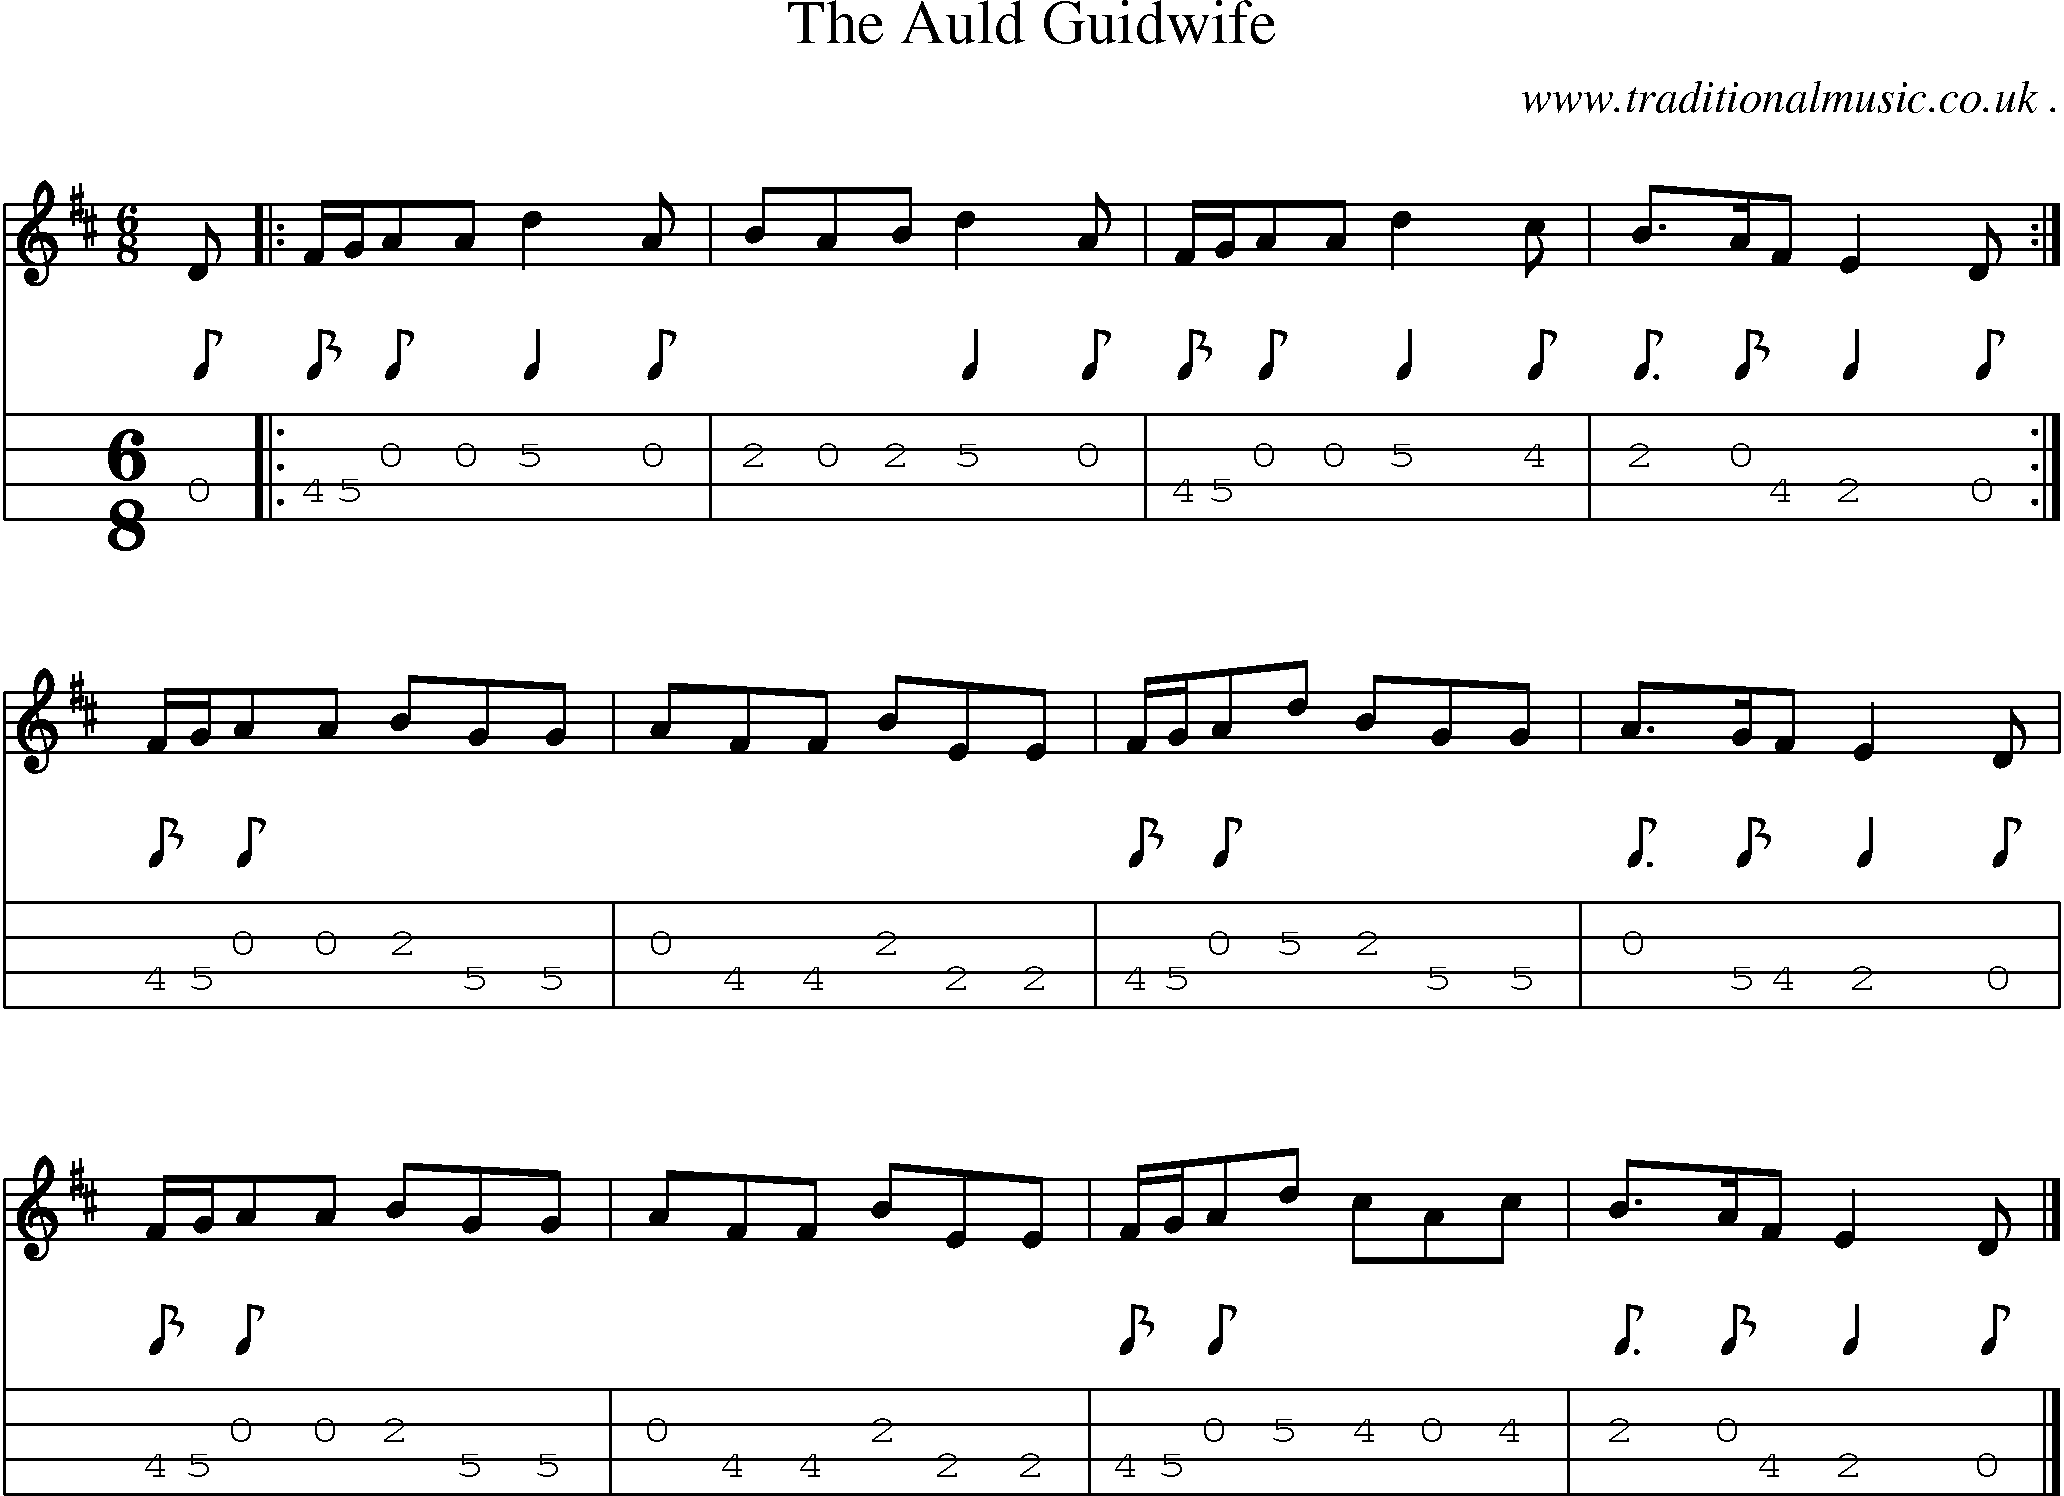 Sheet-music  score, Chords and Mandolin Tabs for The Auld Guidwife